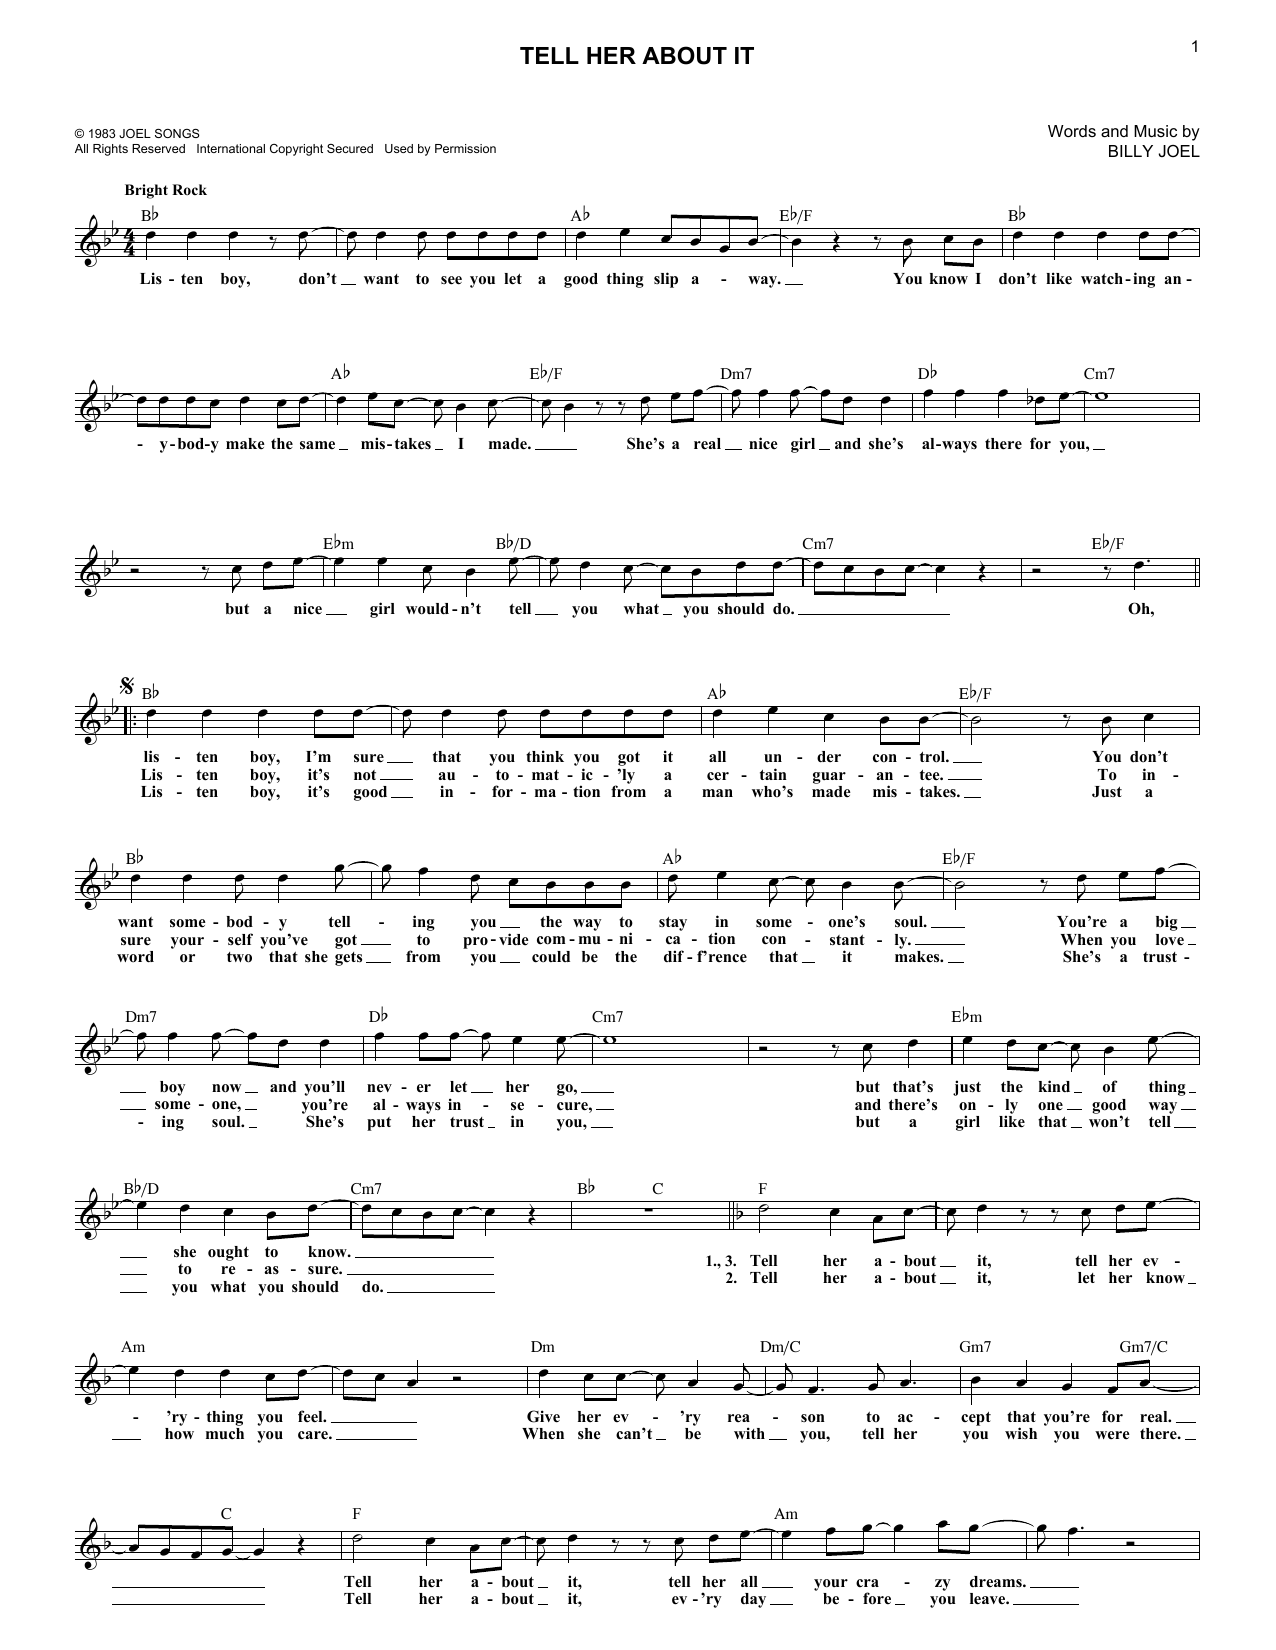 Billy Joel Tell Her About It sheet music notes and chords. Download Printable PDF.